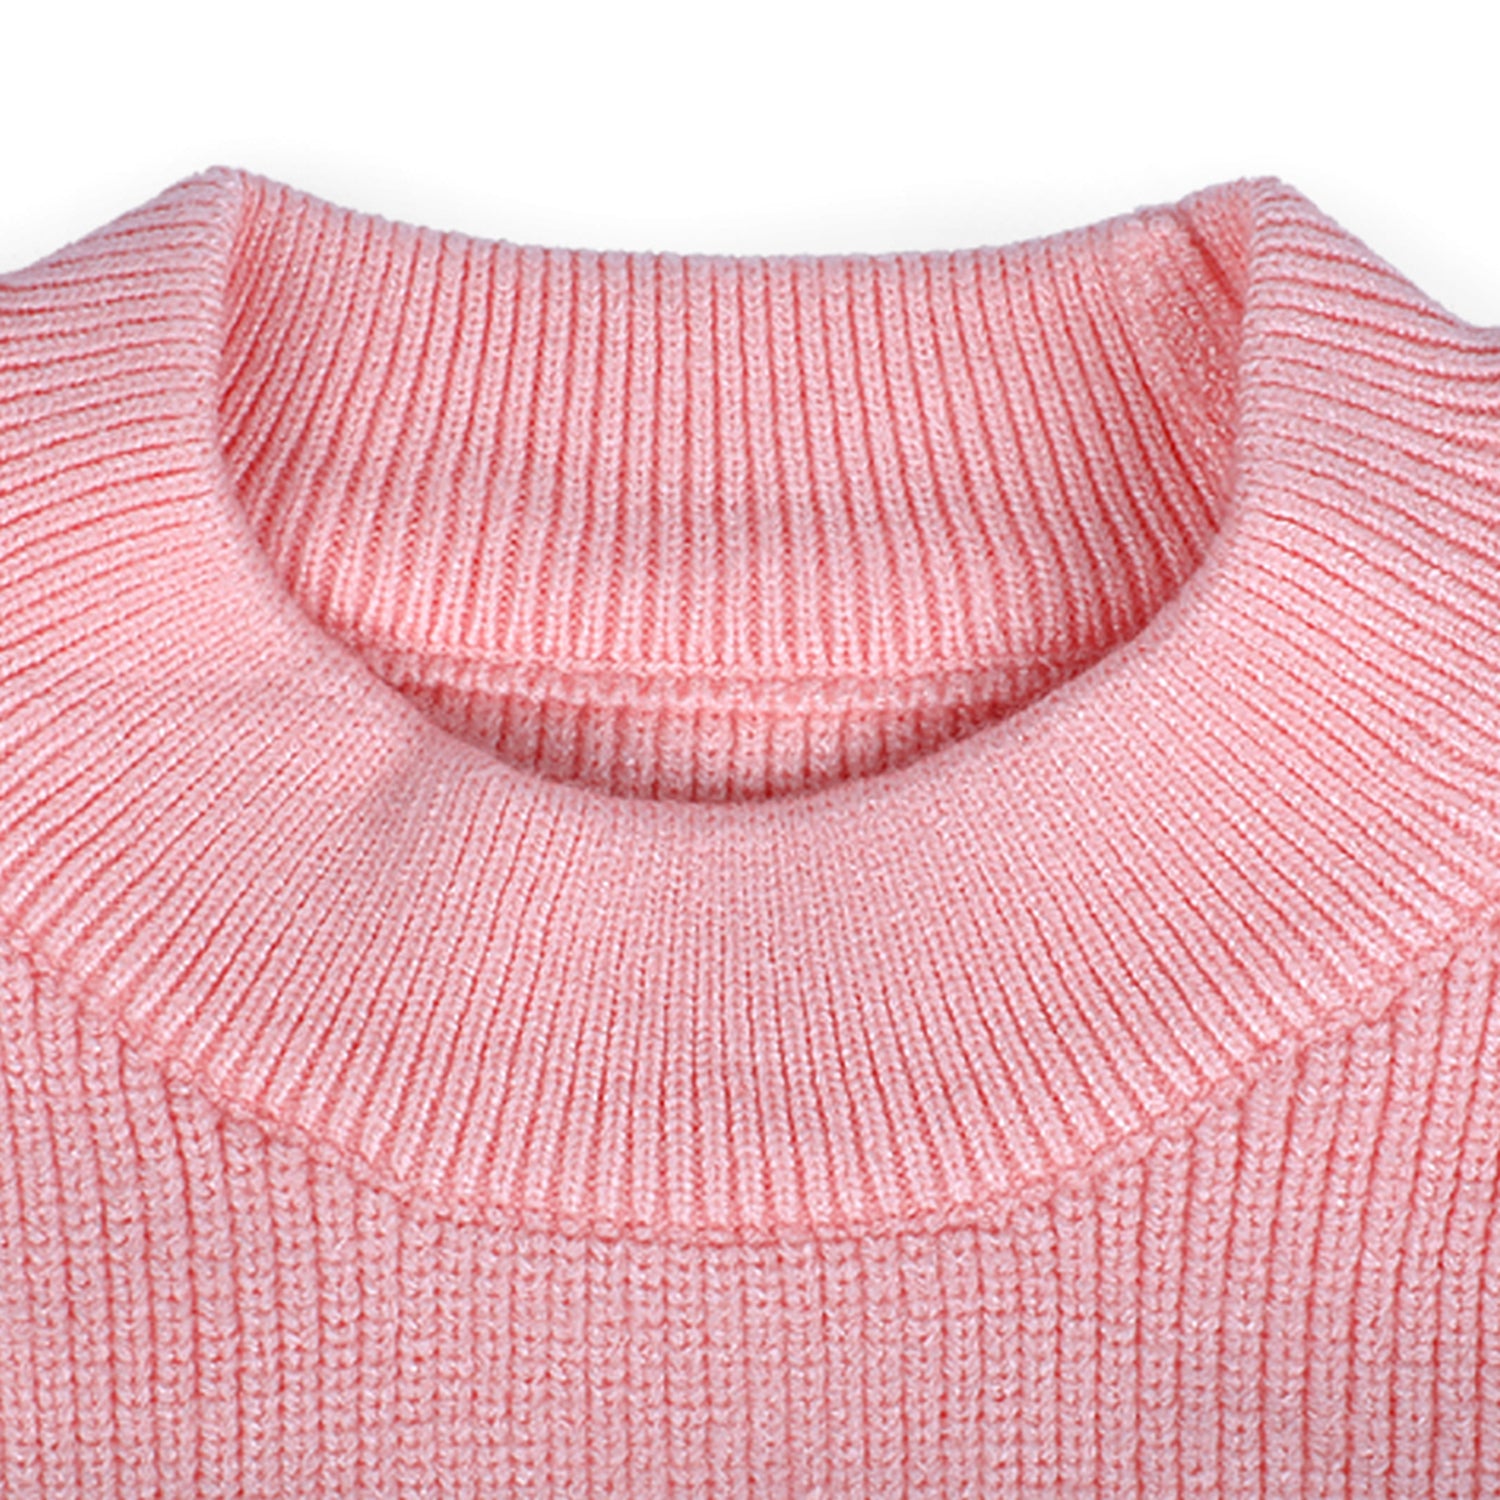 Ruffled Jumper Solid Premium Full Sleeves Braided Knit Sweater - Pink